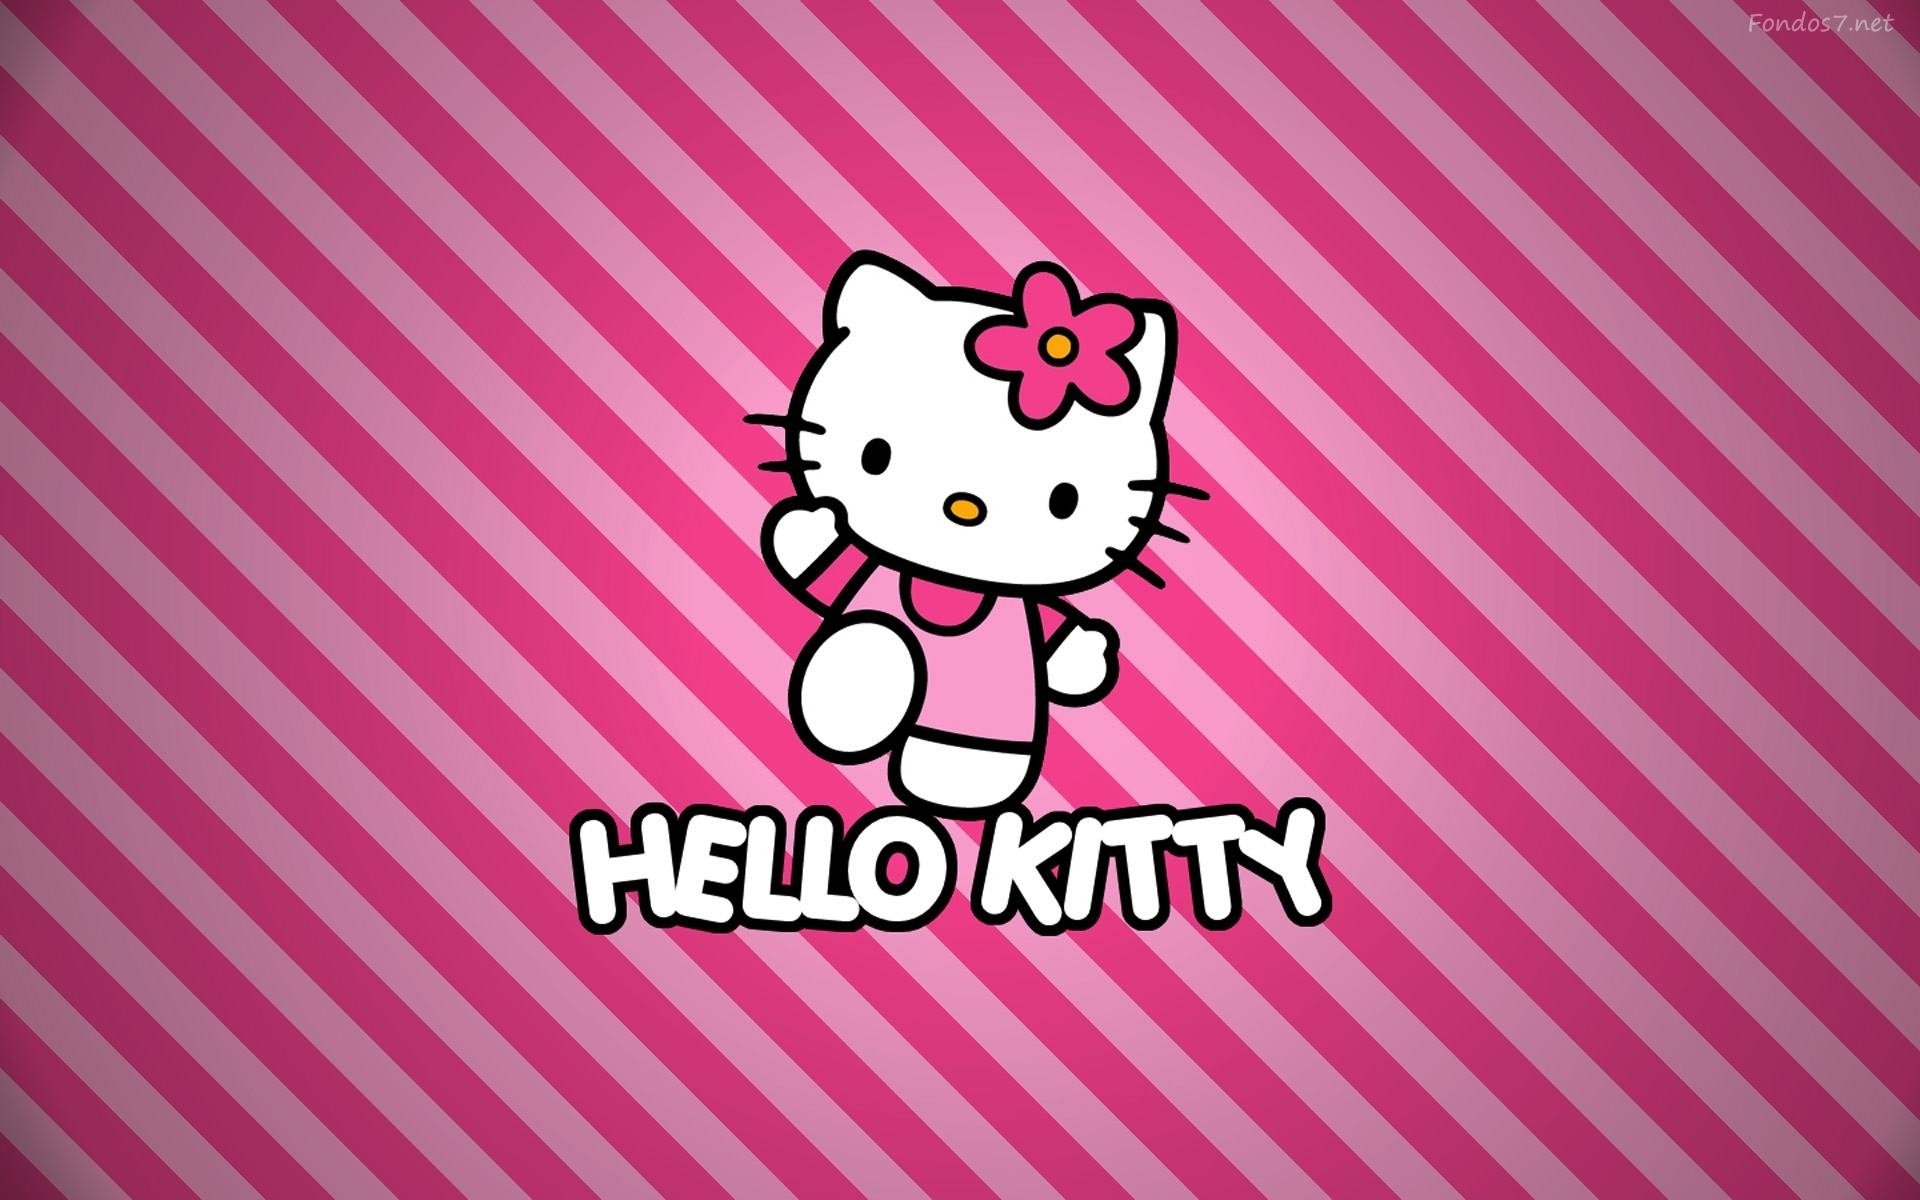 Wallpapers Backgrounds   Pink Hello Kitty Wallpaper Black Background 1920x1200